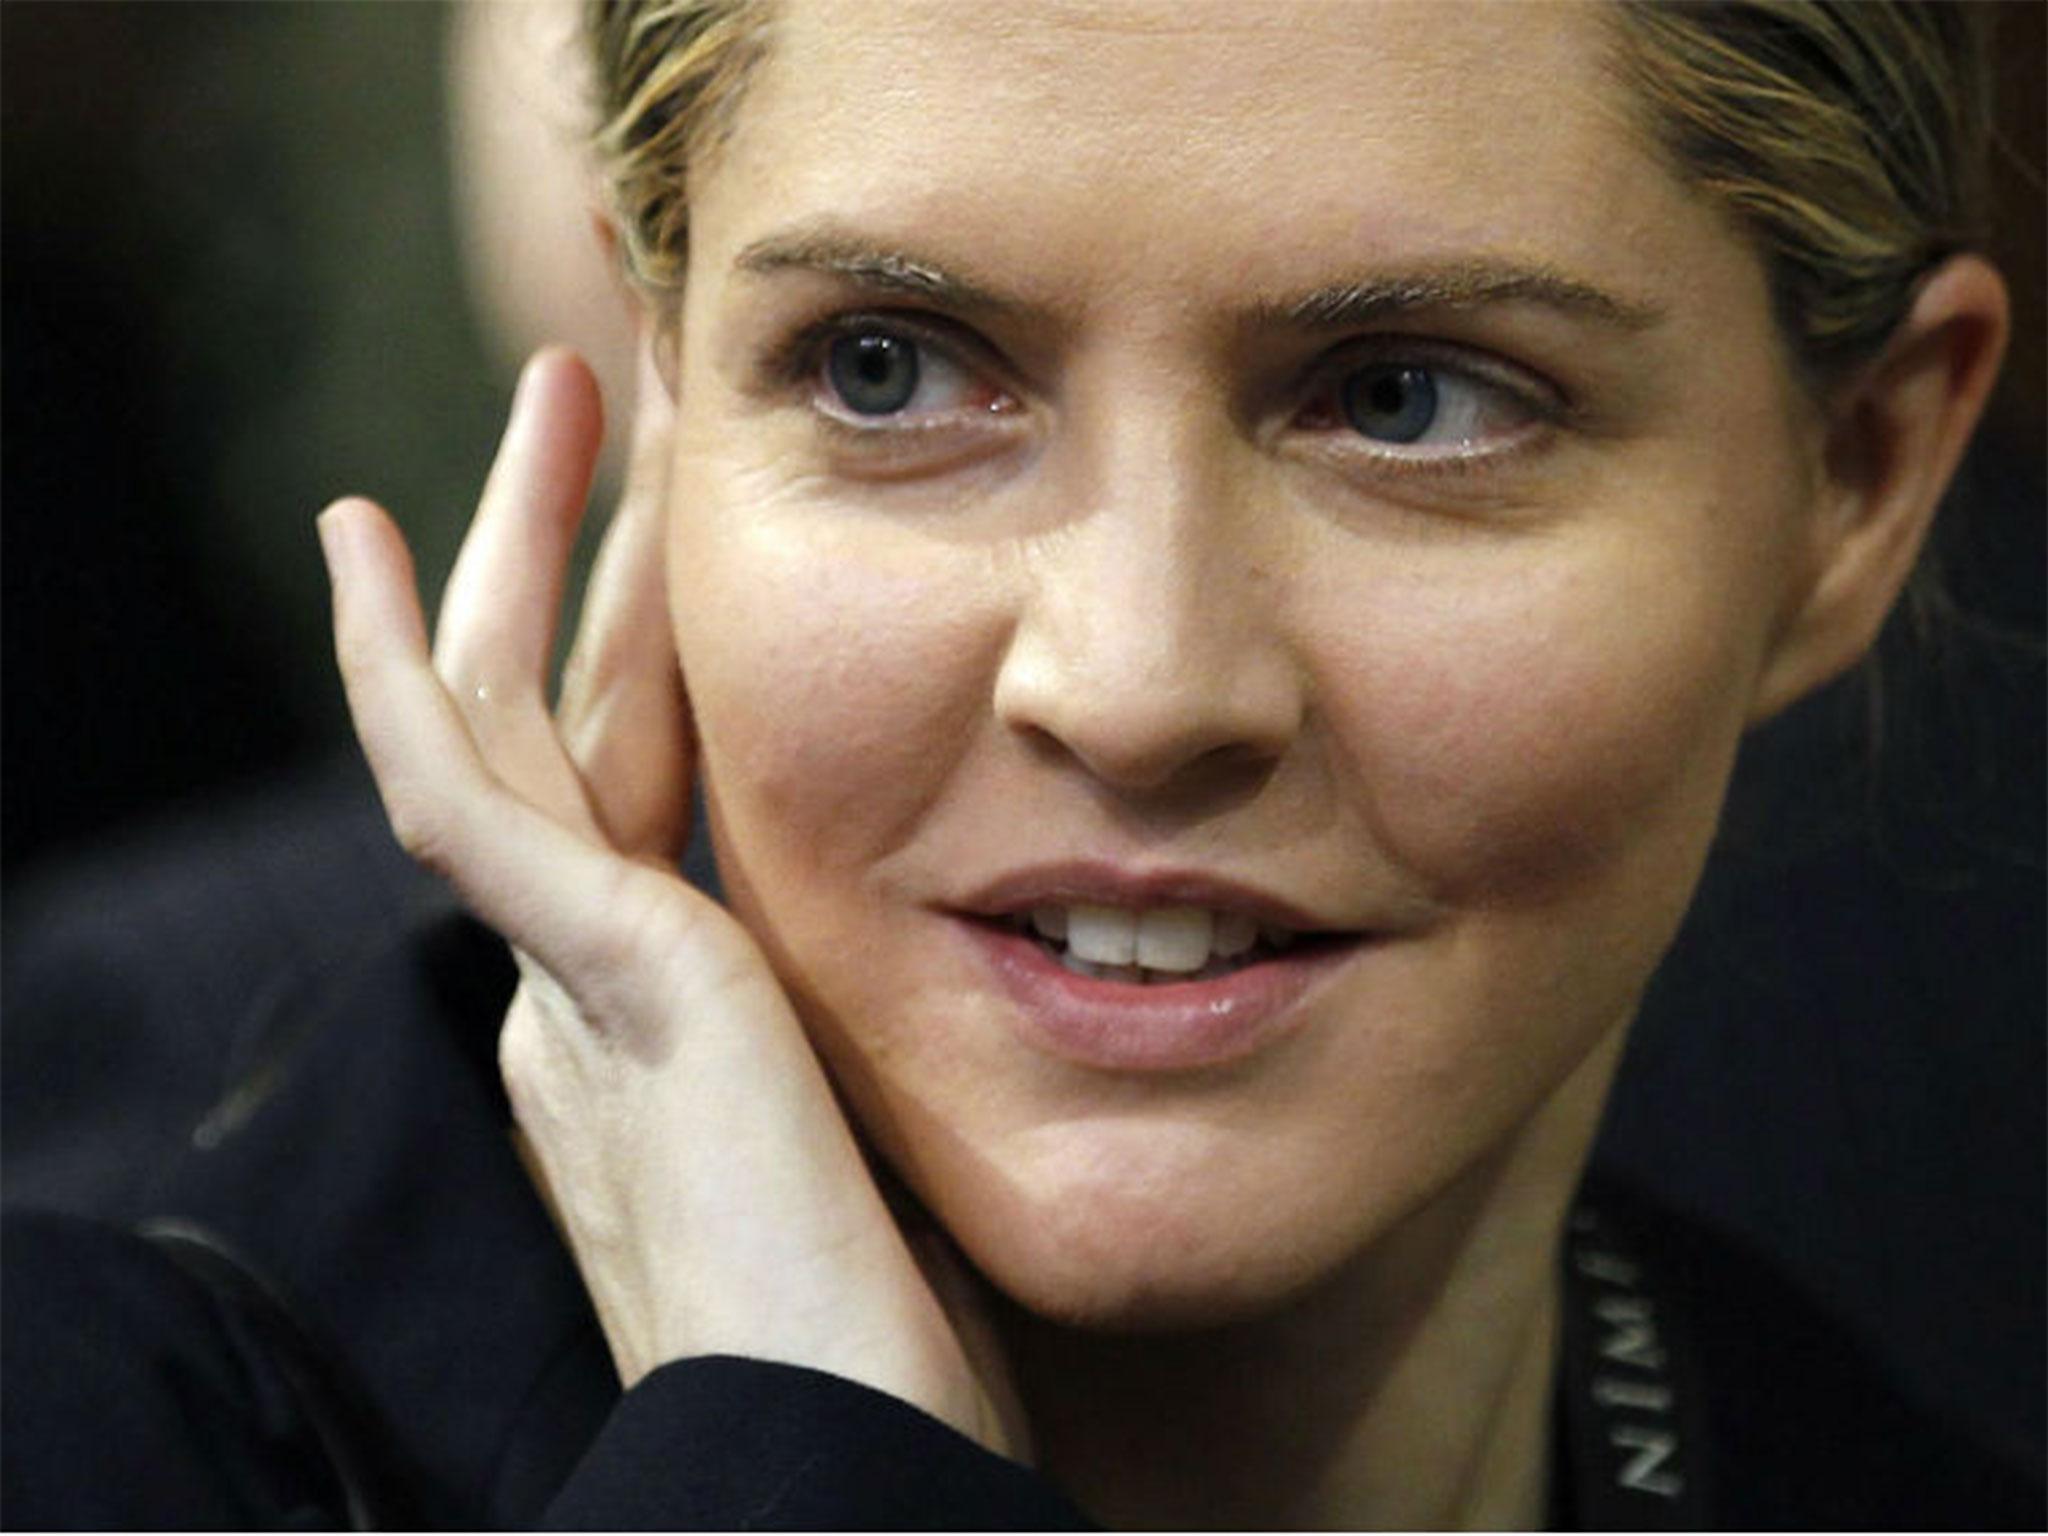 Louise Mensch has refused to back down on the claims saying she has other sources